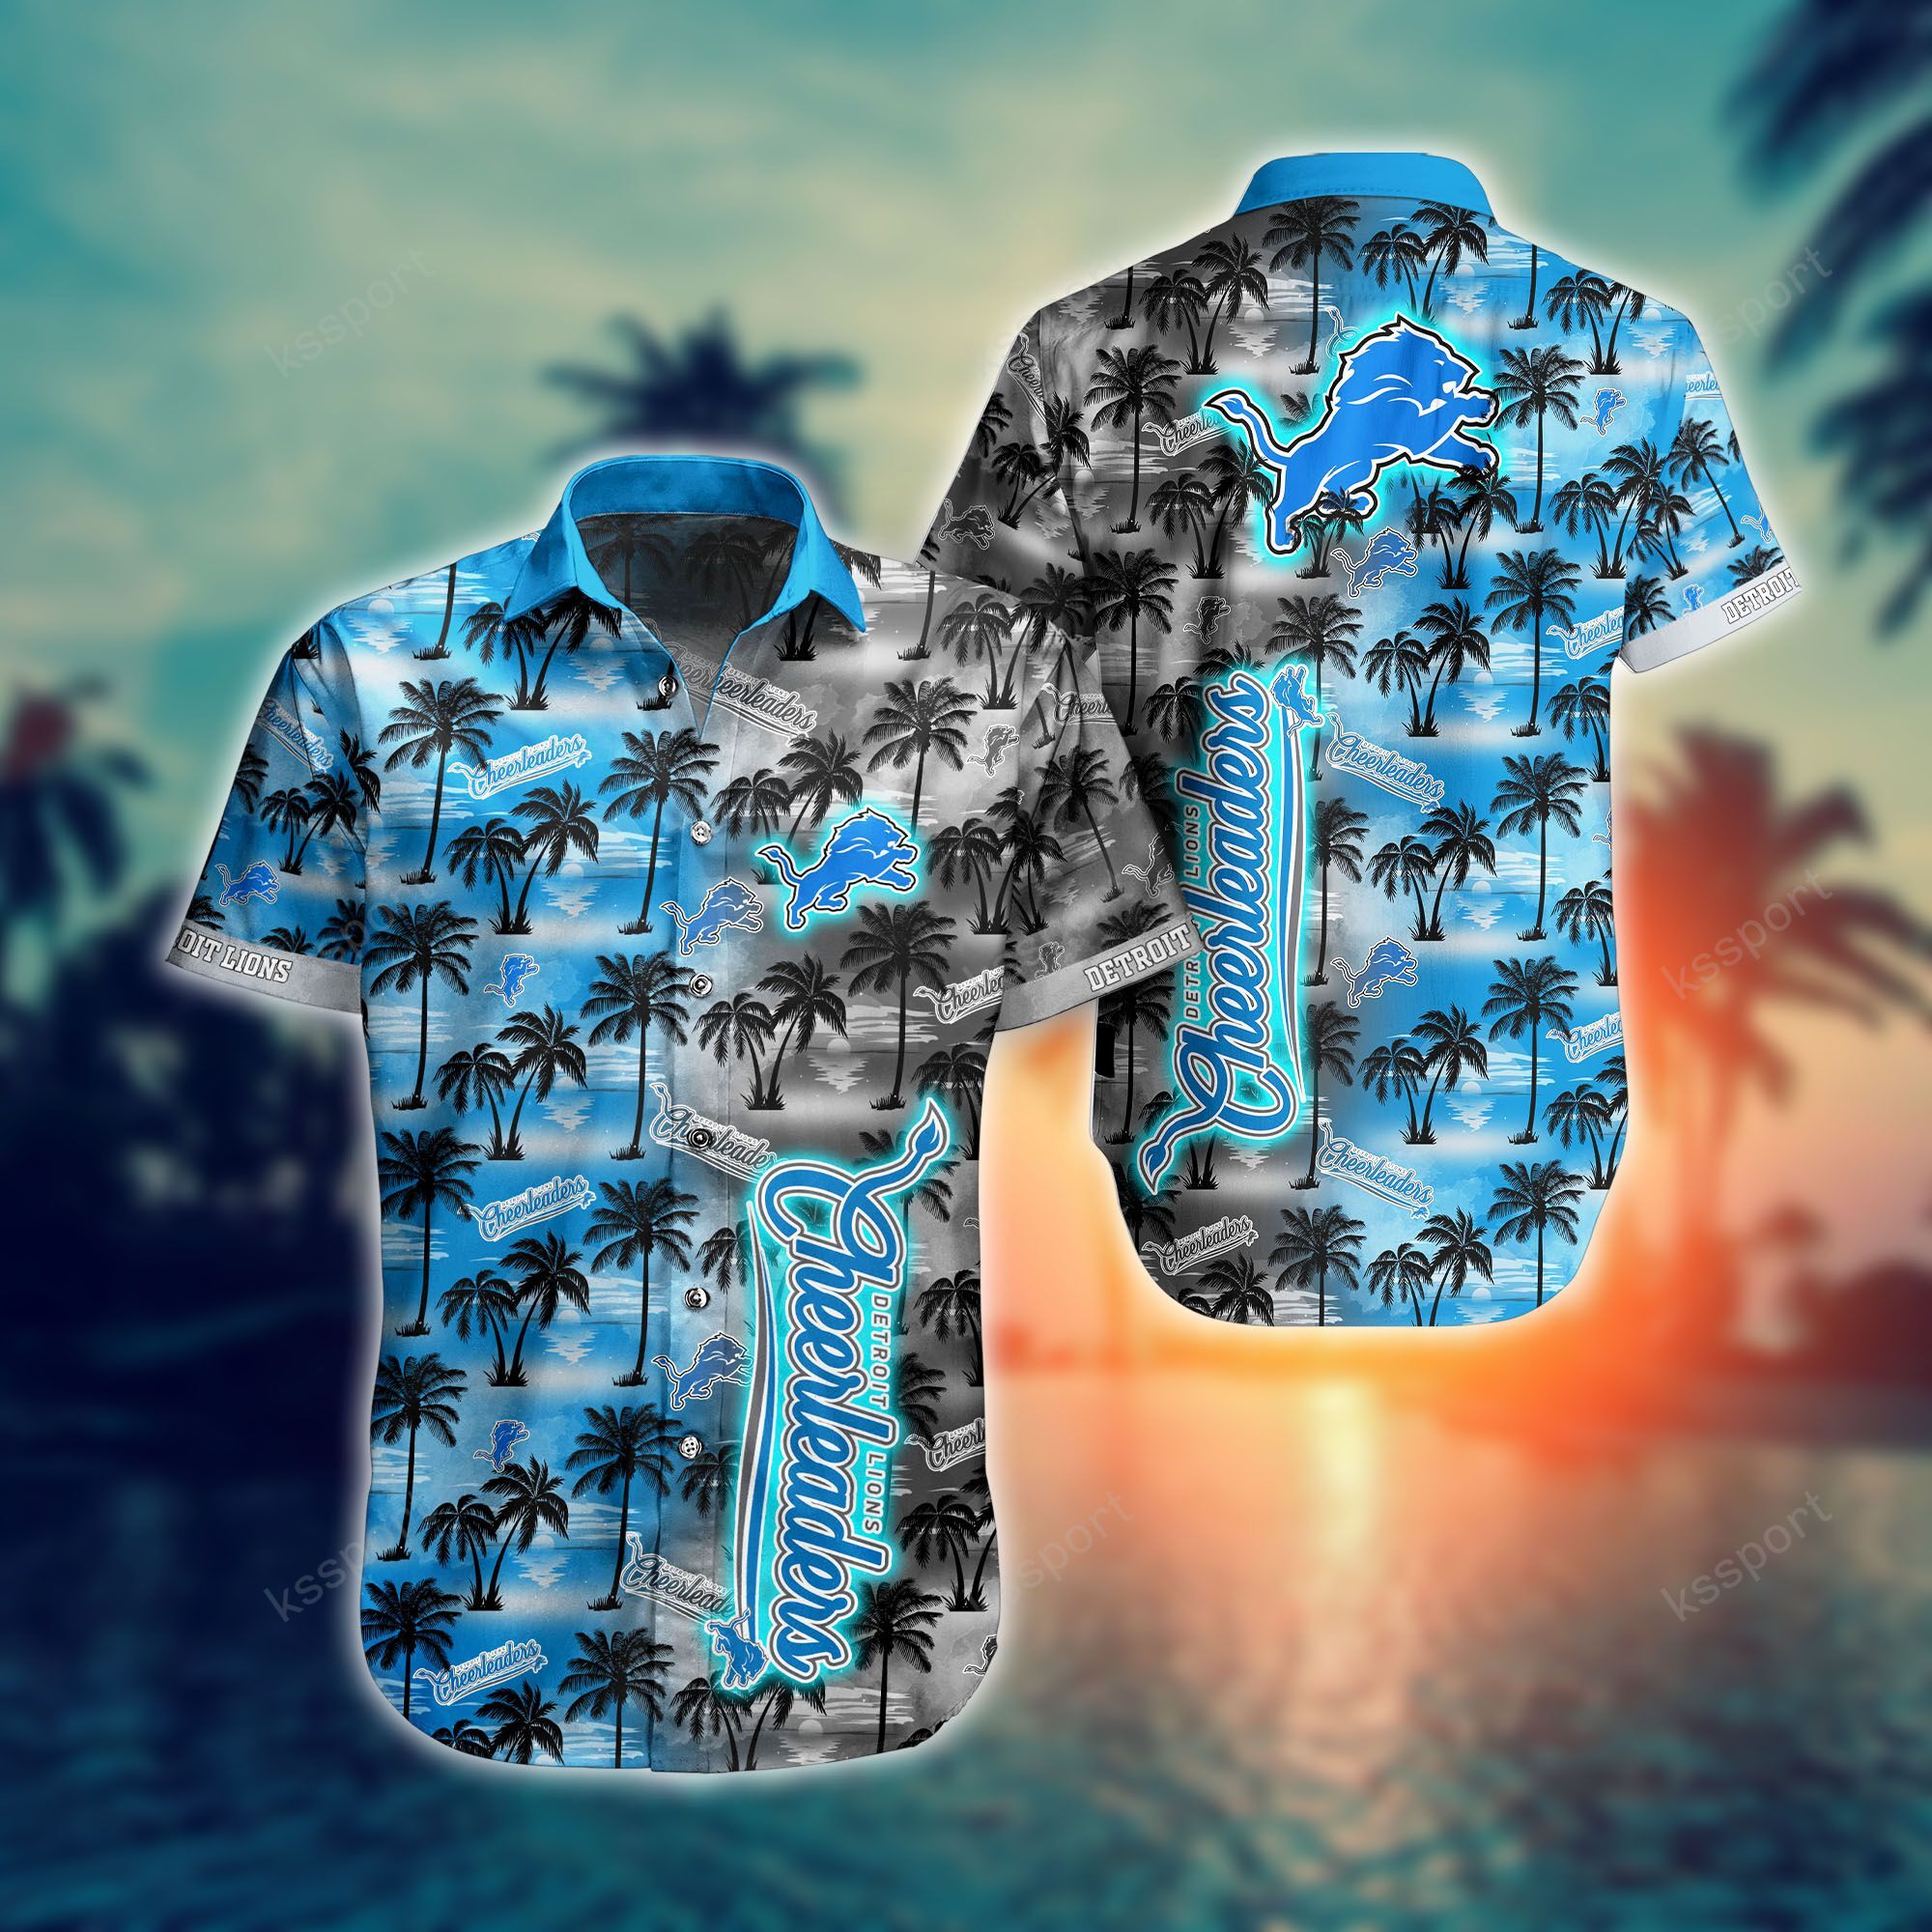 Treat yourself to a cool Hawaiian set today! 105